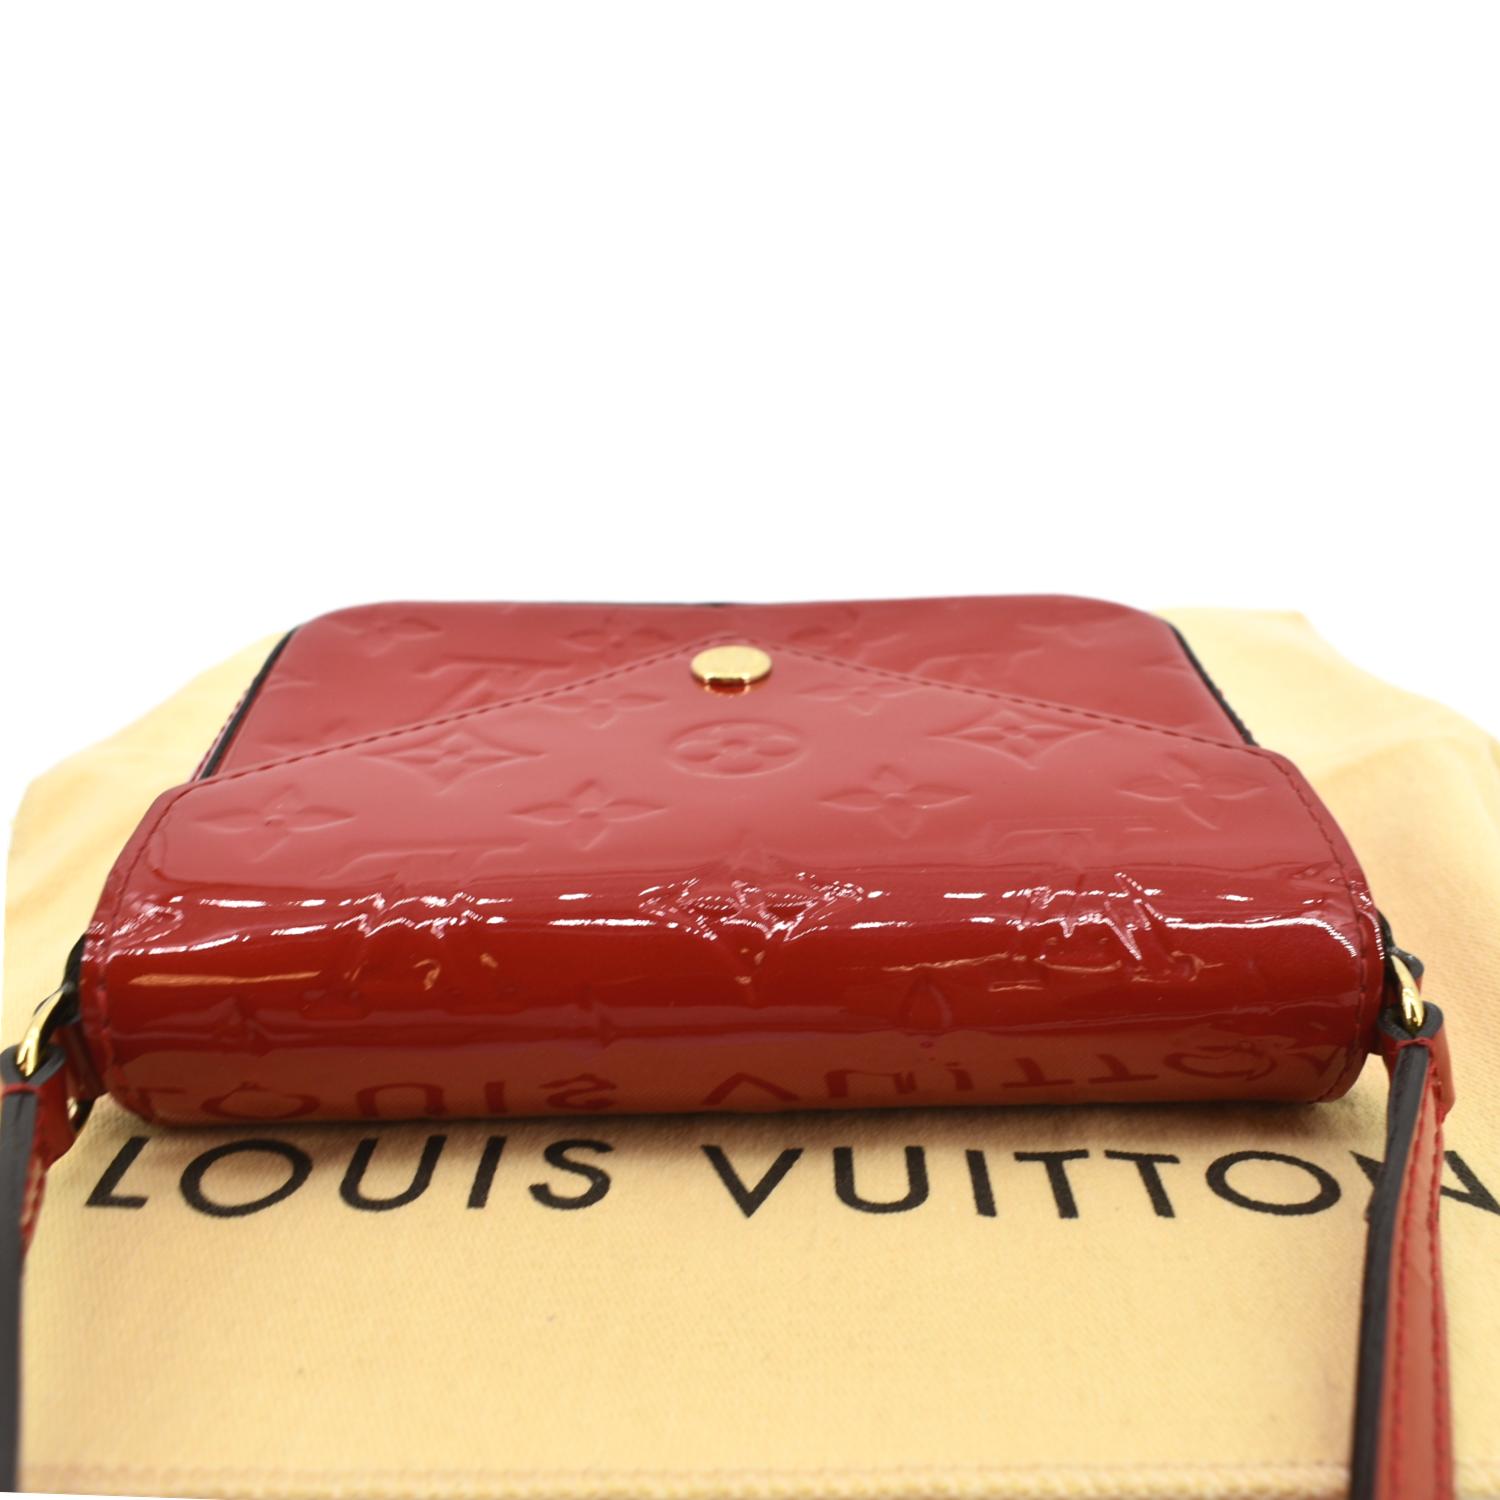 Louis Vuitton Patent Leather Crossbody Bags